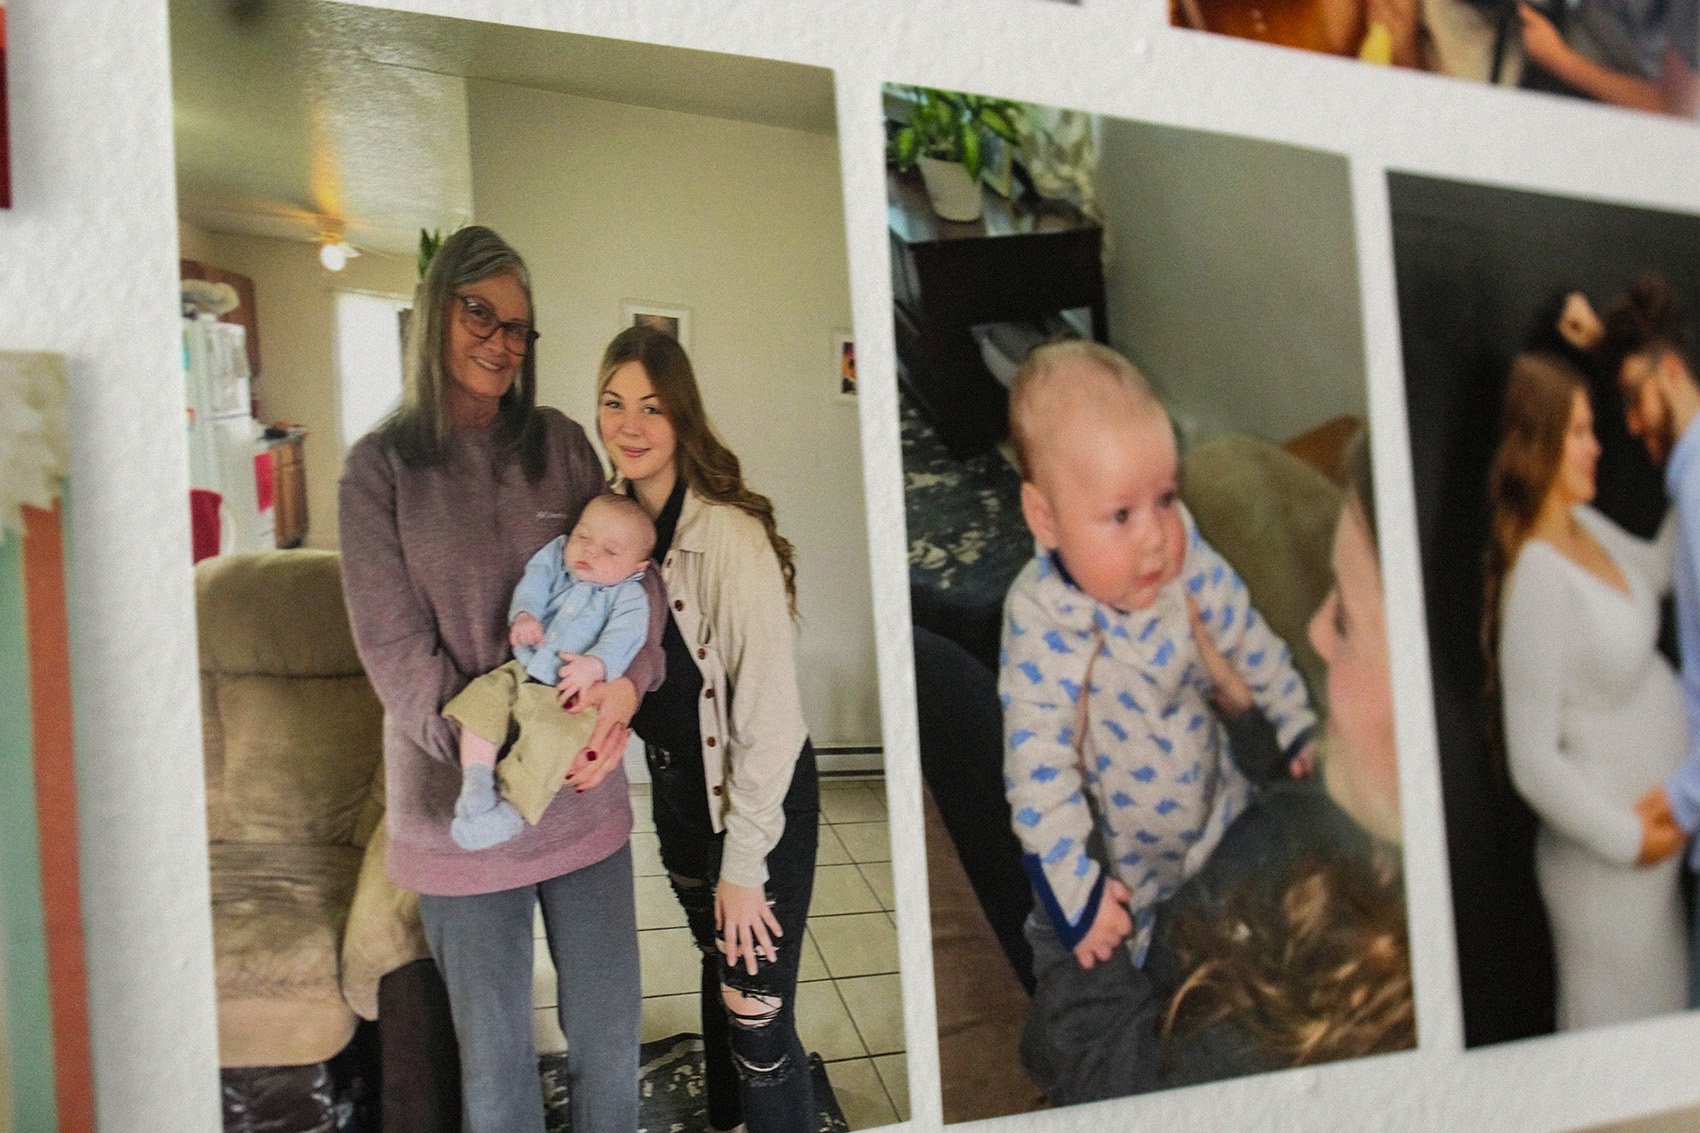 hree pictures on a white wall. Photo on the left shows an older woman with dark/gray hair and a young woman holding a baby in the middle of them. Middle photo shows the baby being held (center) and a woman holding the baby in the bottom right. Photo on the far right shows a pregnant woman facing a man.